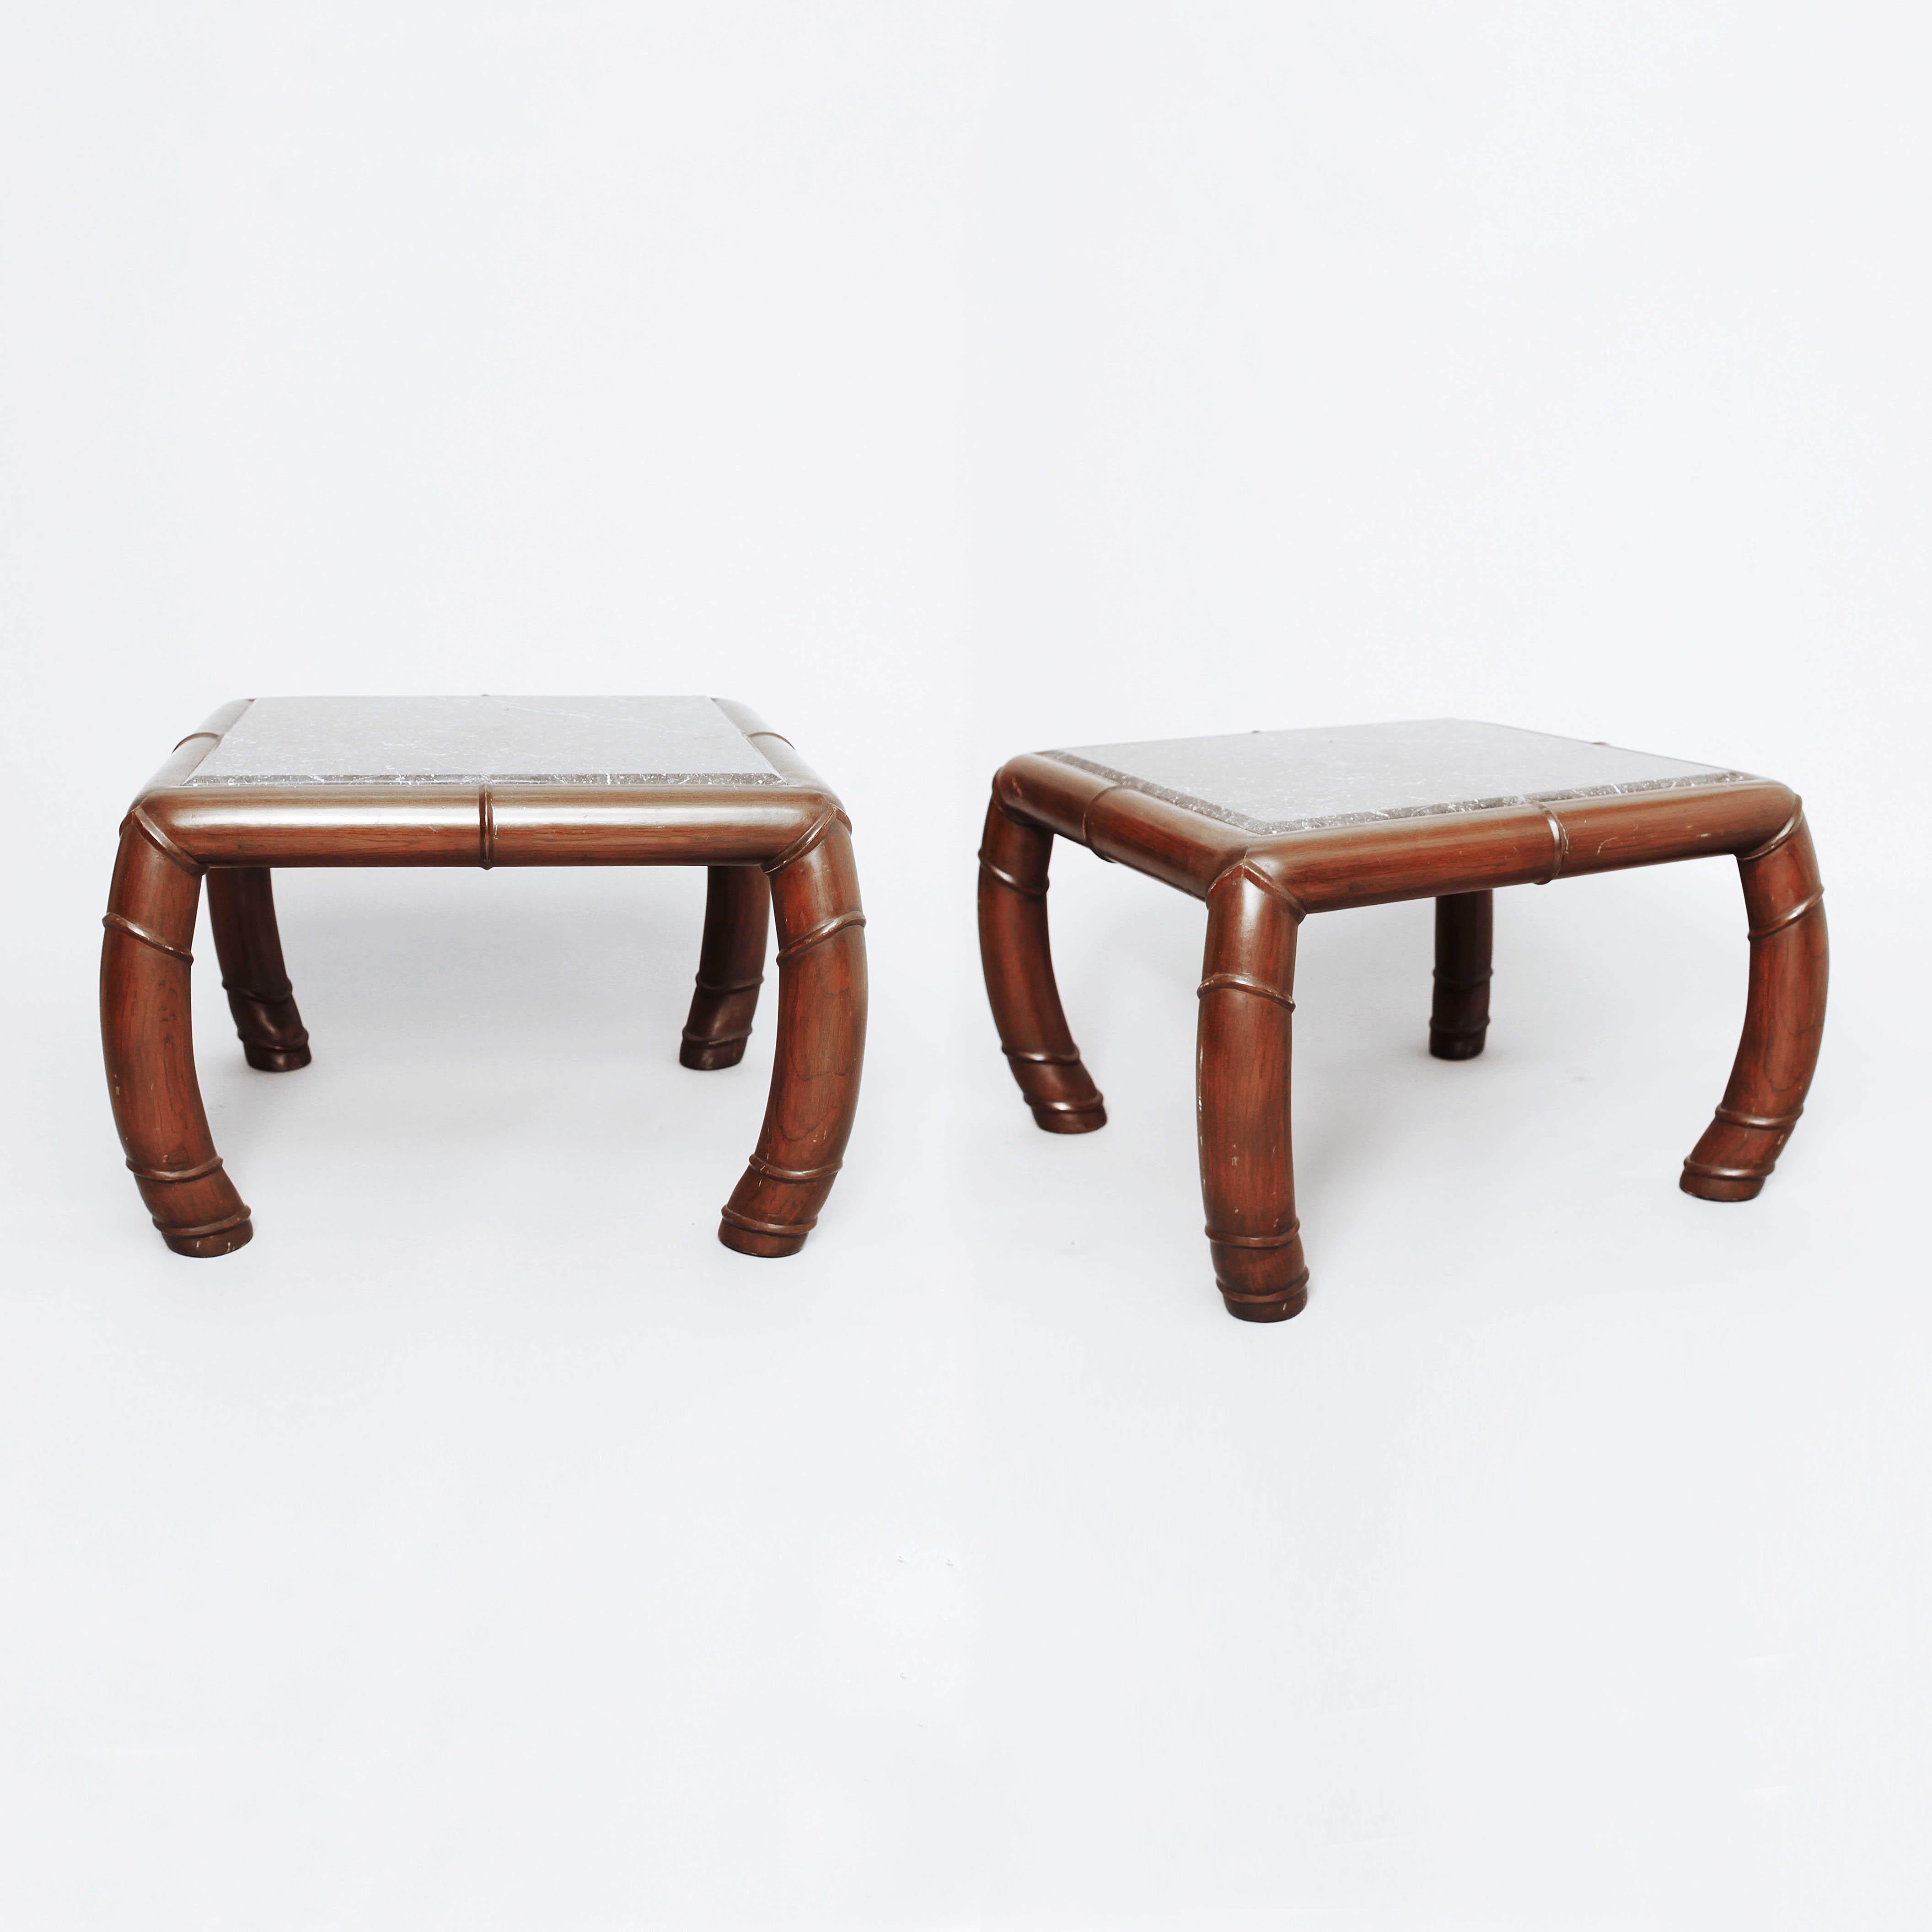 Unique pair of large faux-bamboo side tables with a grey, veined marble top. Solid and heavy pair of end tables with curved legs and bevelled marble top. Very elegant design, and the epitome of Hollywood Regency style, imported from the